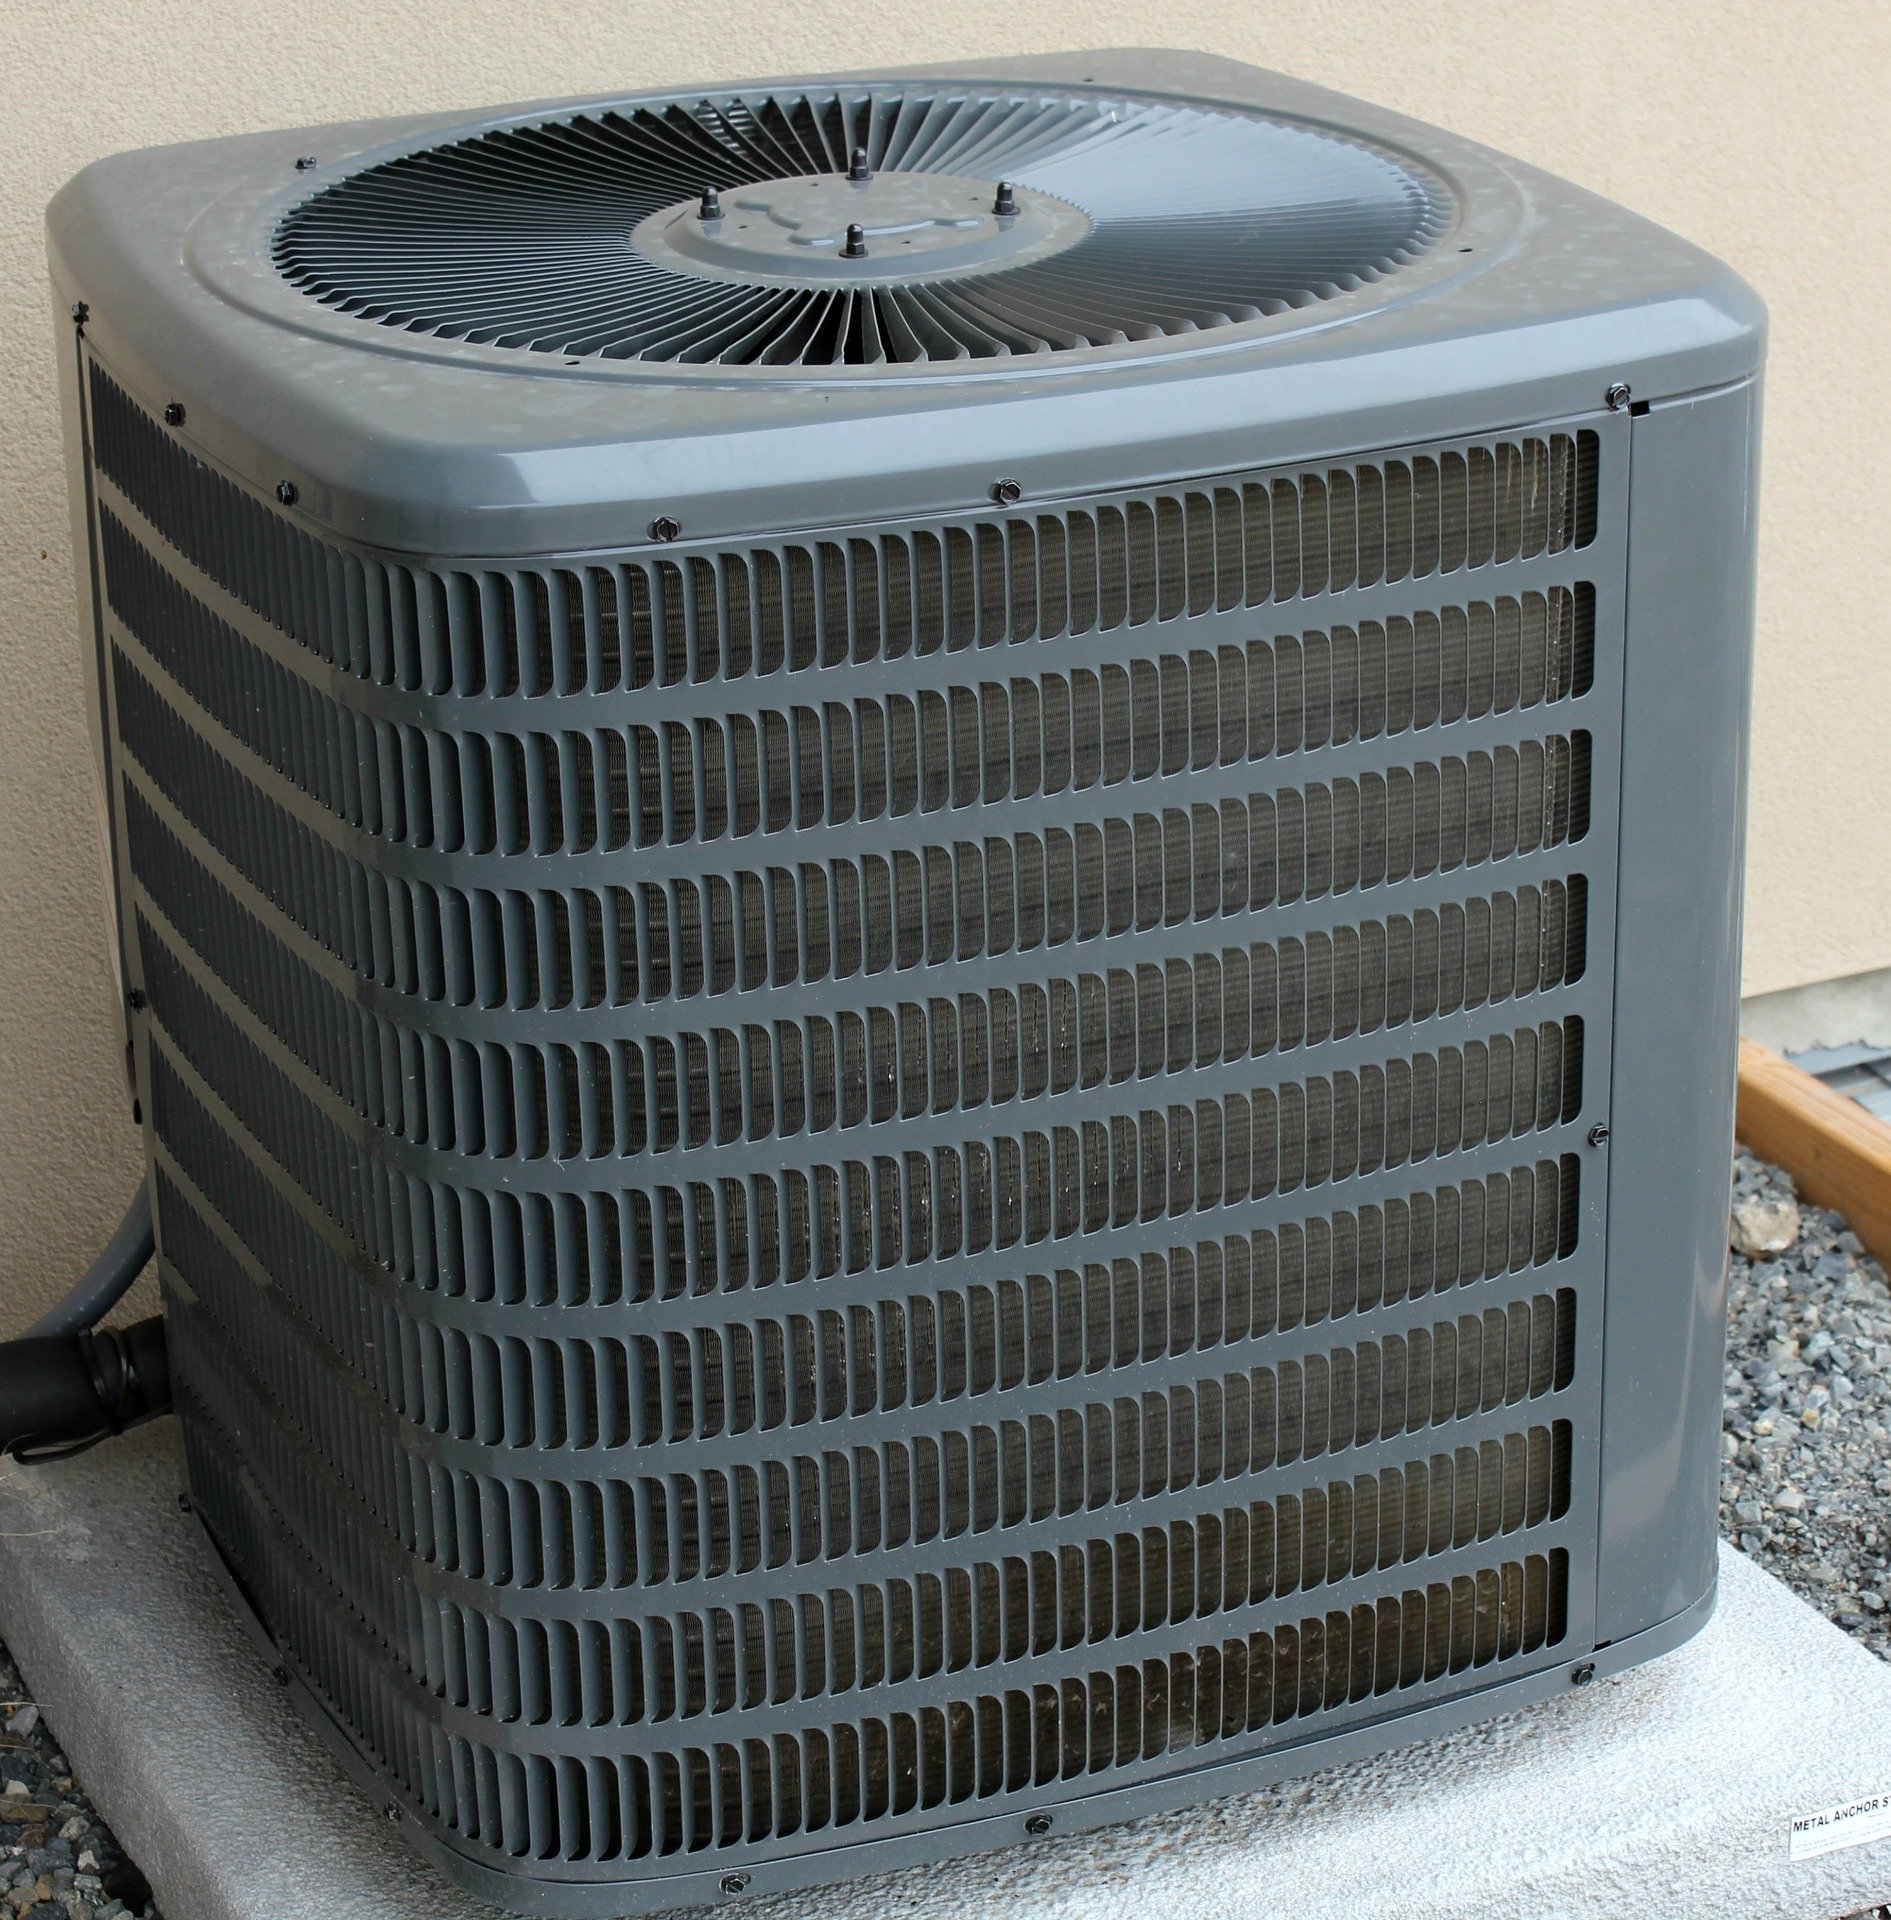 Cool it Down or Turn Up the Heat? The Pros and Cons of Different Summer Cooling Methods - Evaporative Coolers (Swamp Coolers)